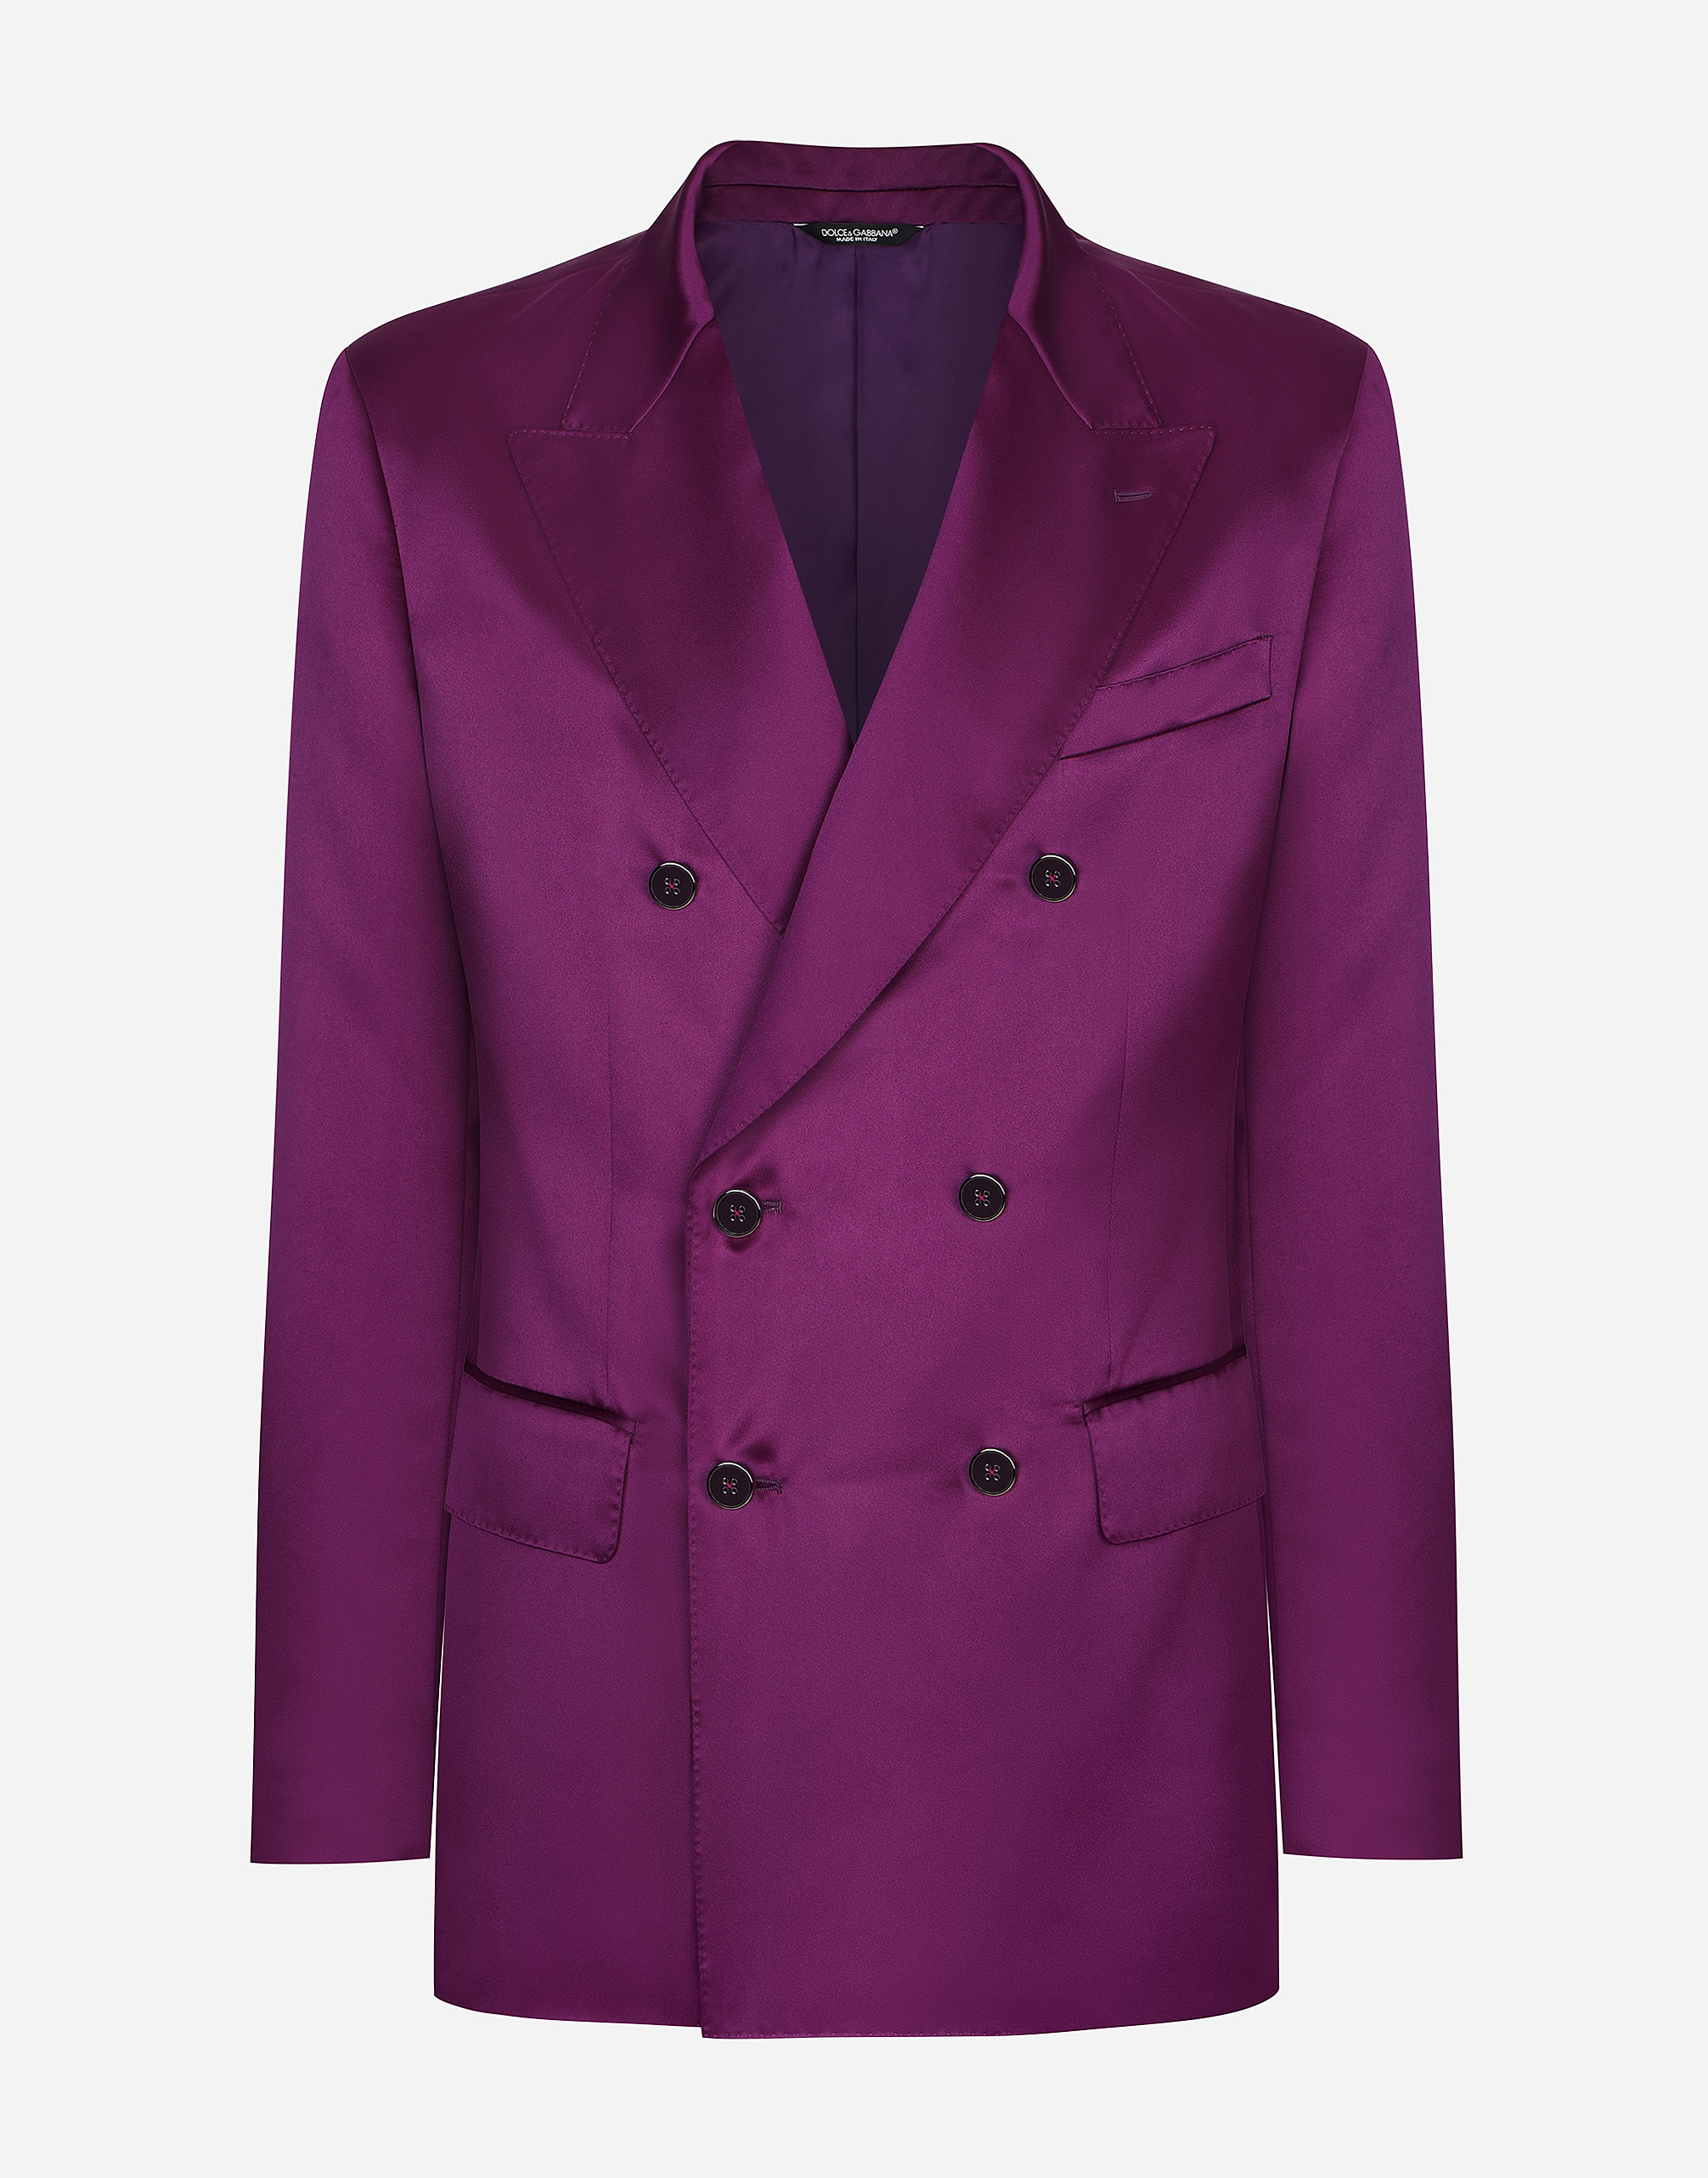 Deconstructed double-breasted satin jacket